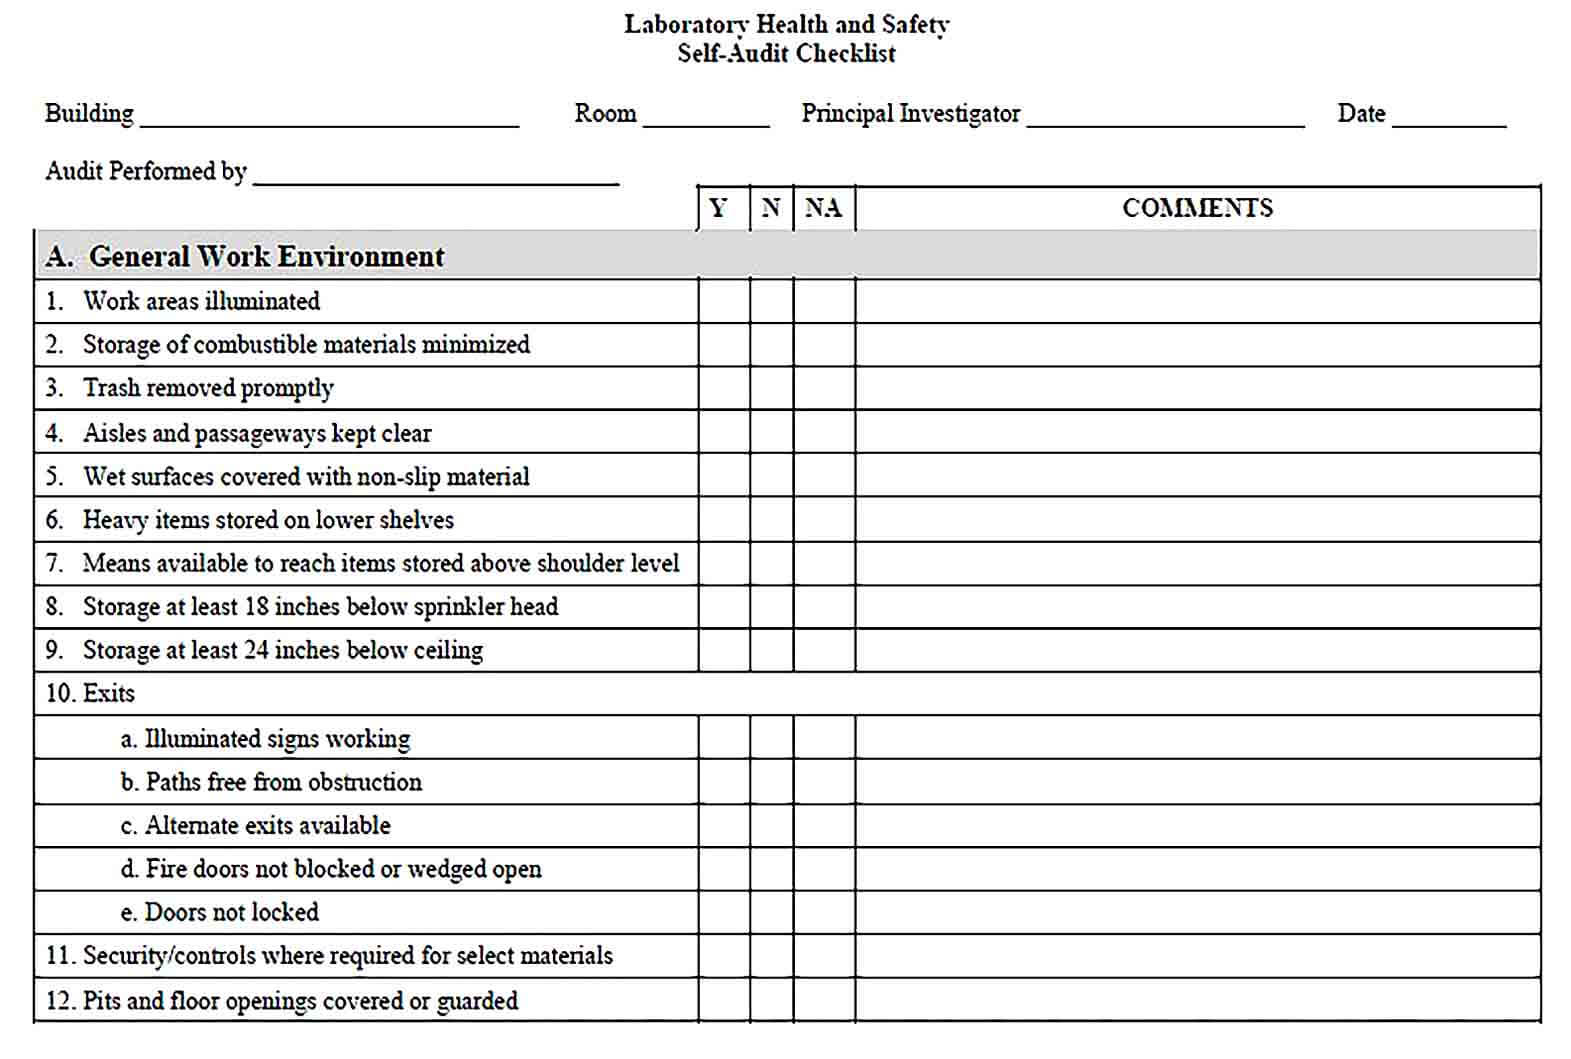 Sample Laboratory Health and Safety Audit Report